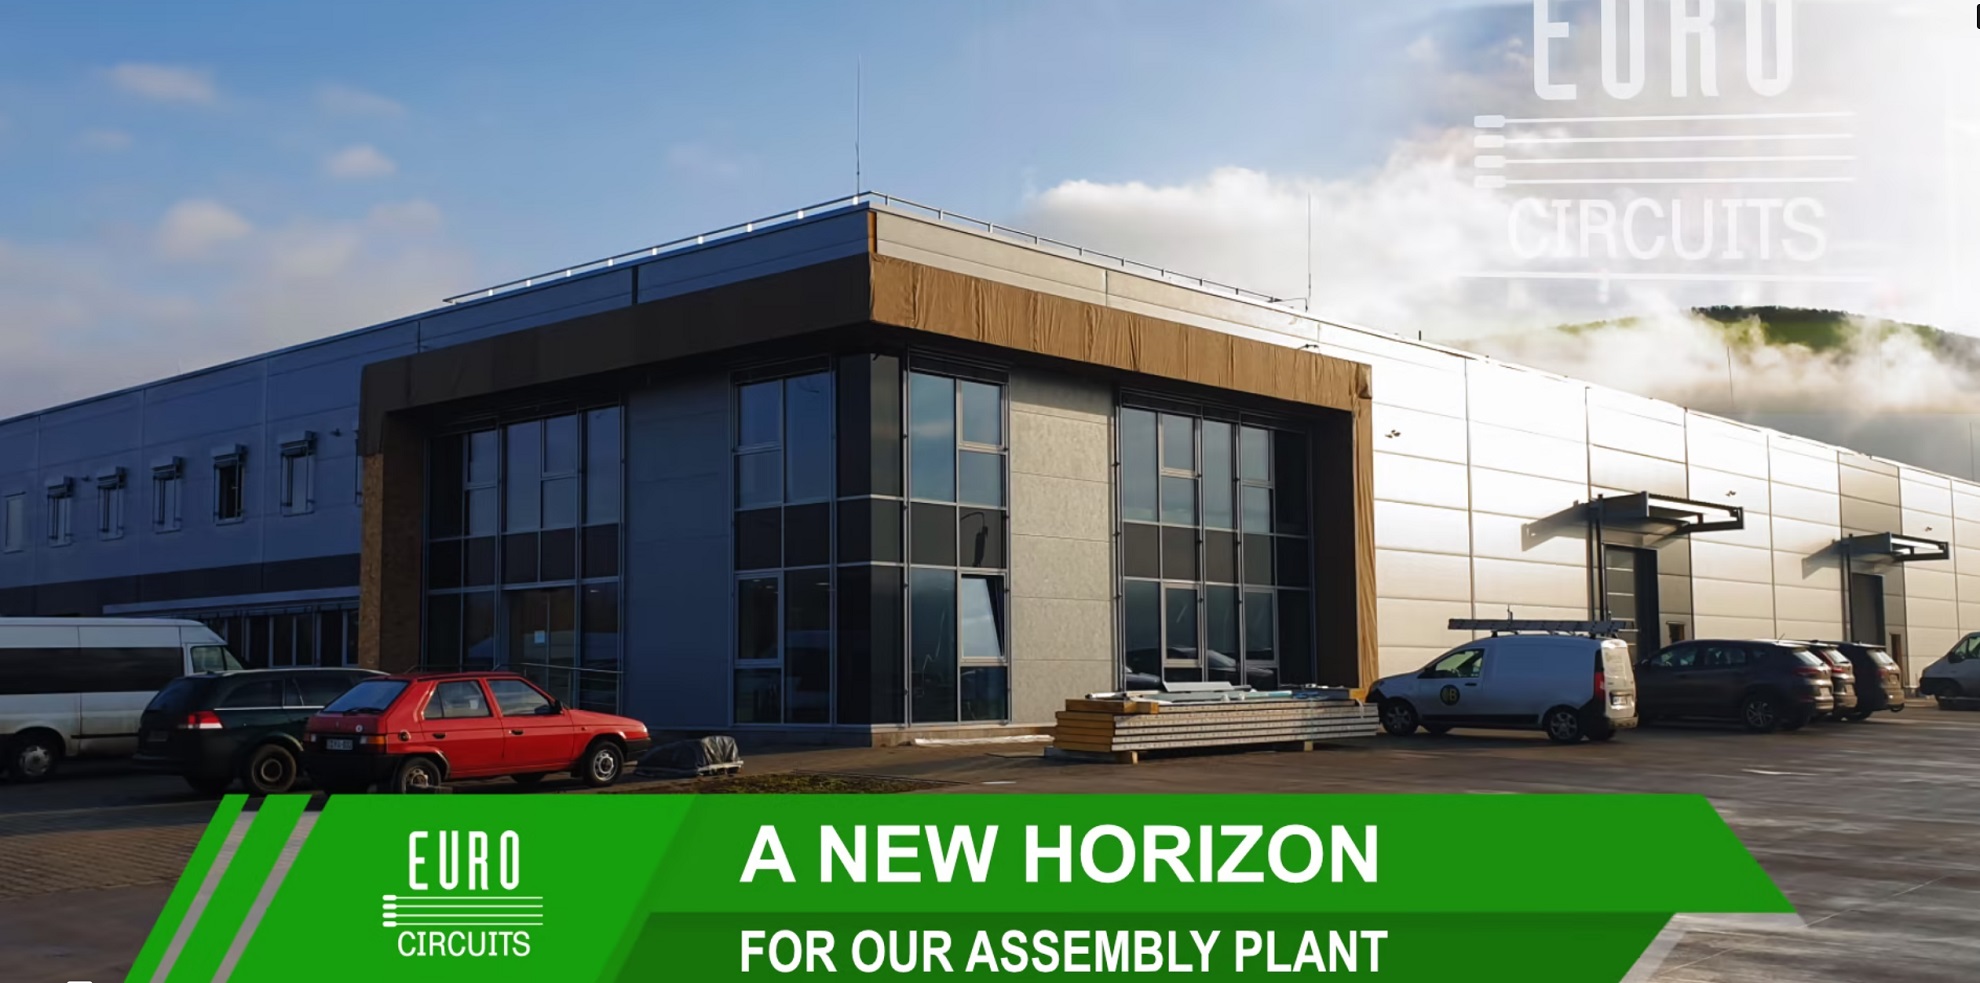 New horizon for our assembly plant